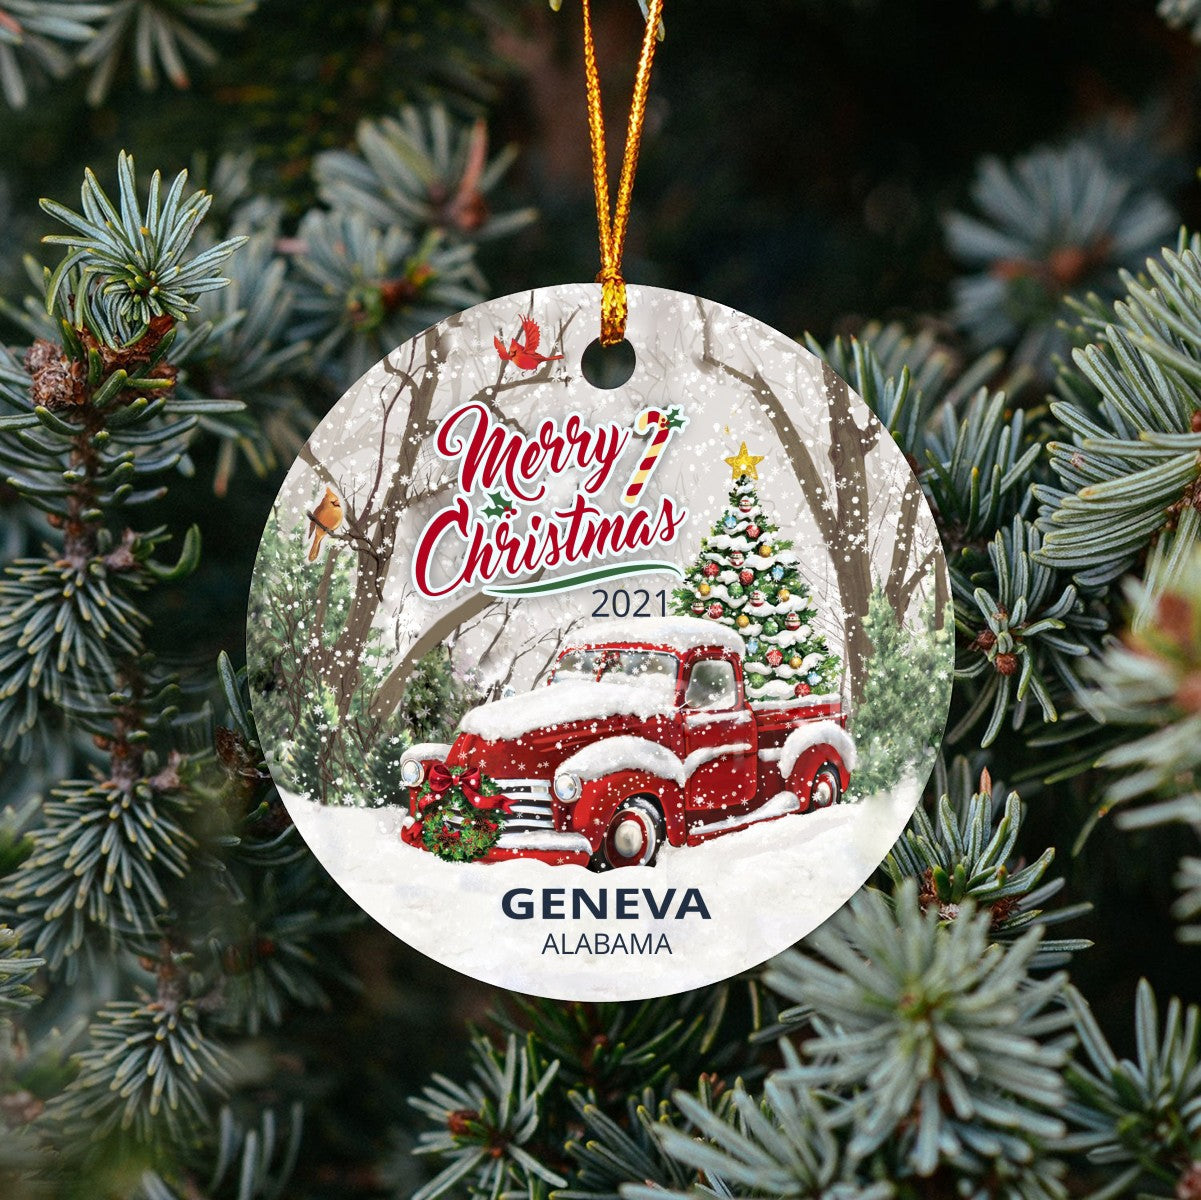 Christmas Tree Ornaments Geneva - Ornament With Name City, State Geneva Alabama AL Ornament - Red Truck Xmas Ornaments 3'' Plastic Gift For Family, Friend And Housewarming